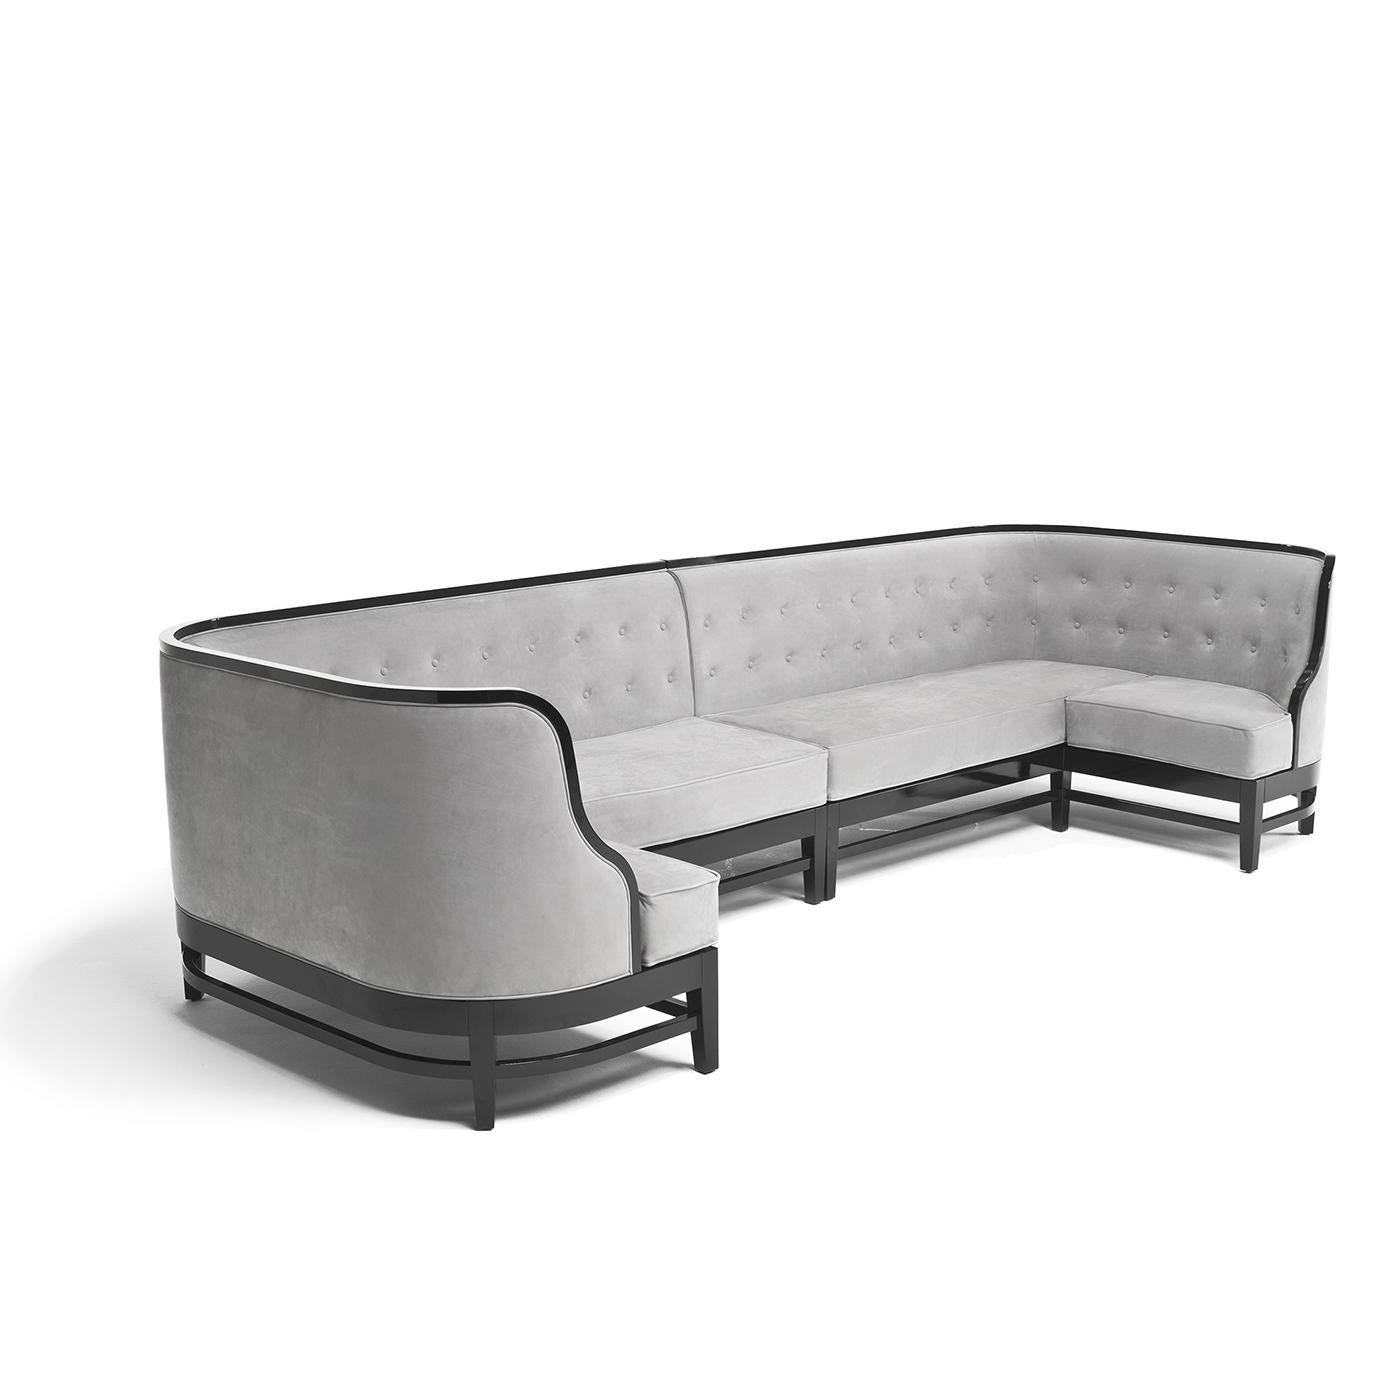 Designed to inspire intimate get-togethers, the Siparia Sofa is curved on both ends to bring you in. Crafted on a solid wood base with a glossy finish, the sofa is upholstered in soft nubuck leather, shown here in soft gray. When completed with a